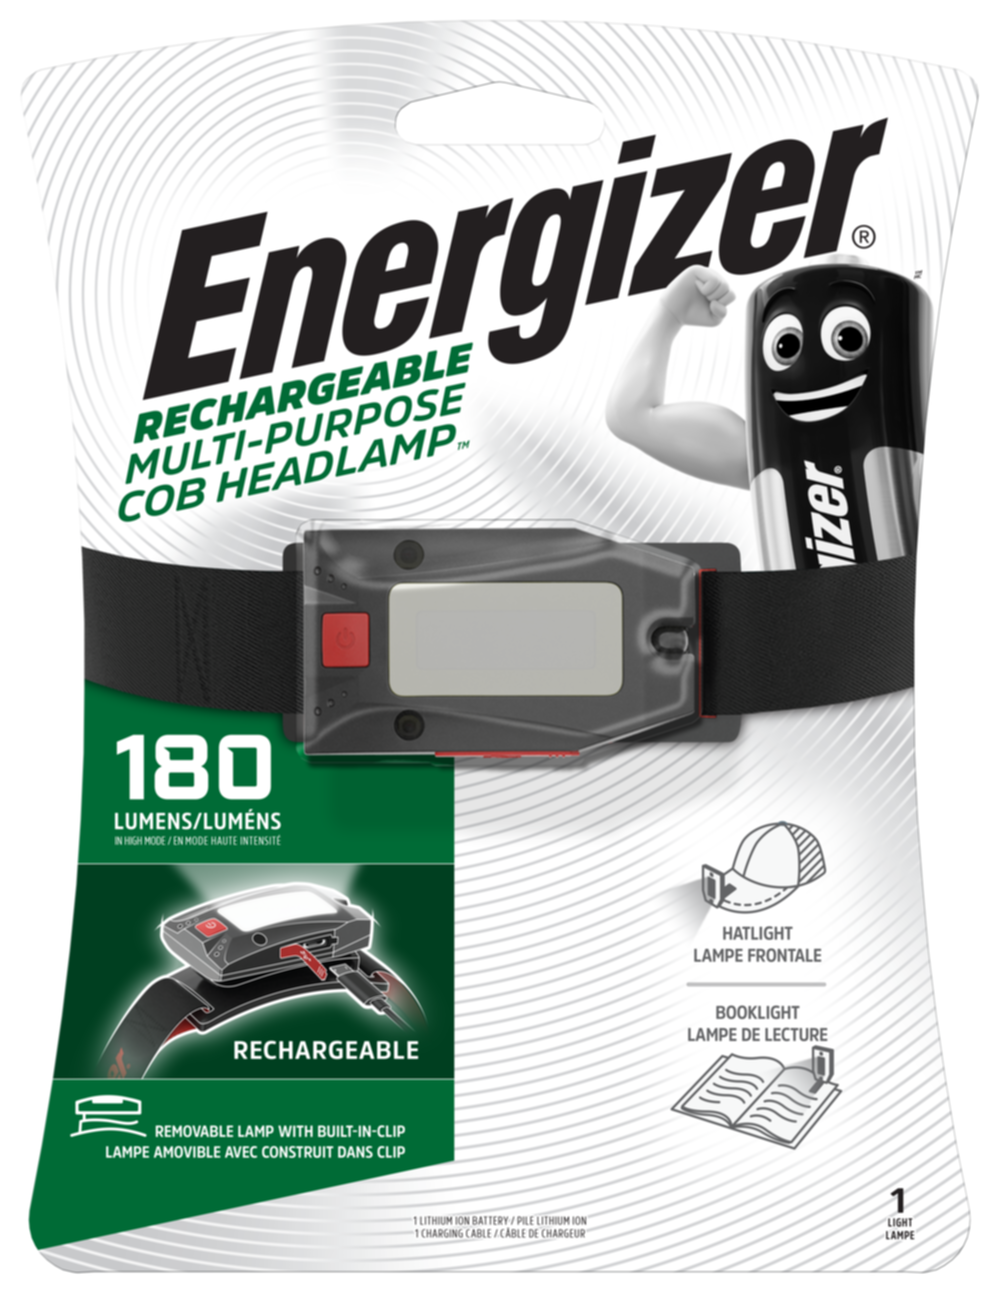 Lampe frontale amovible rechargeable 180lm - ENERGIZER